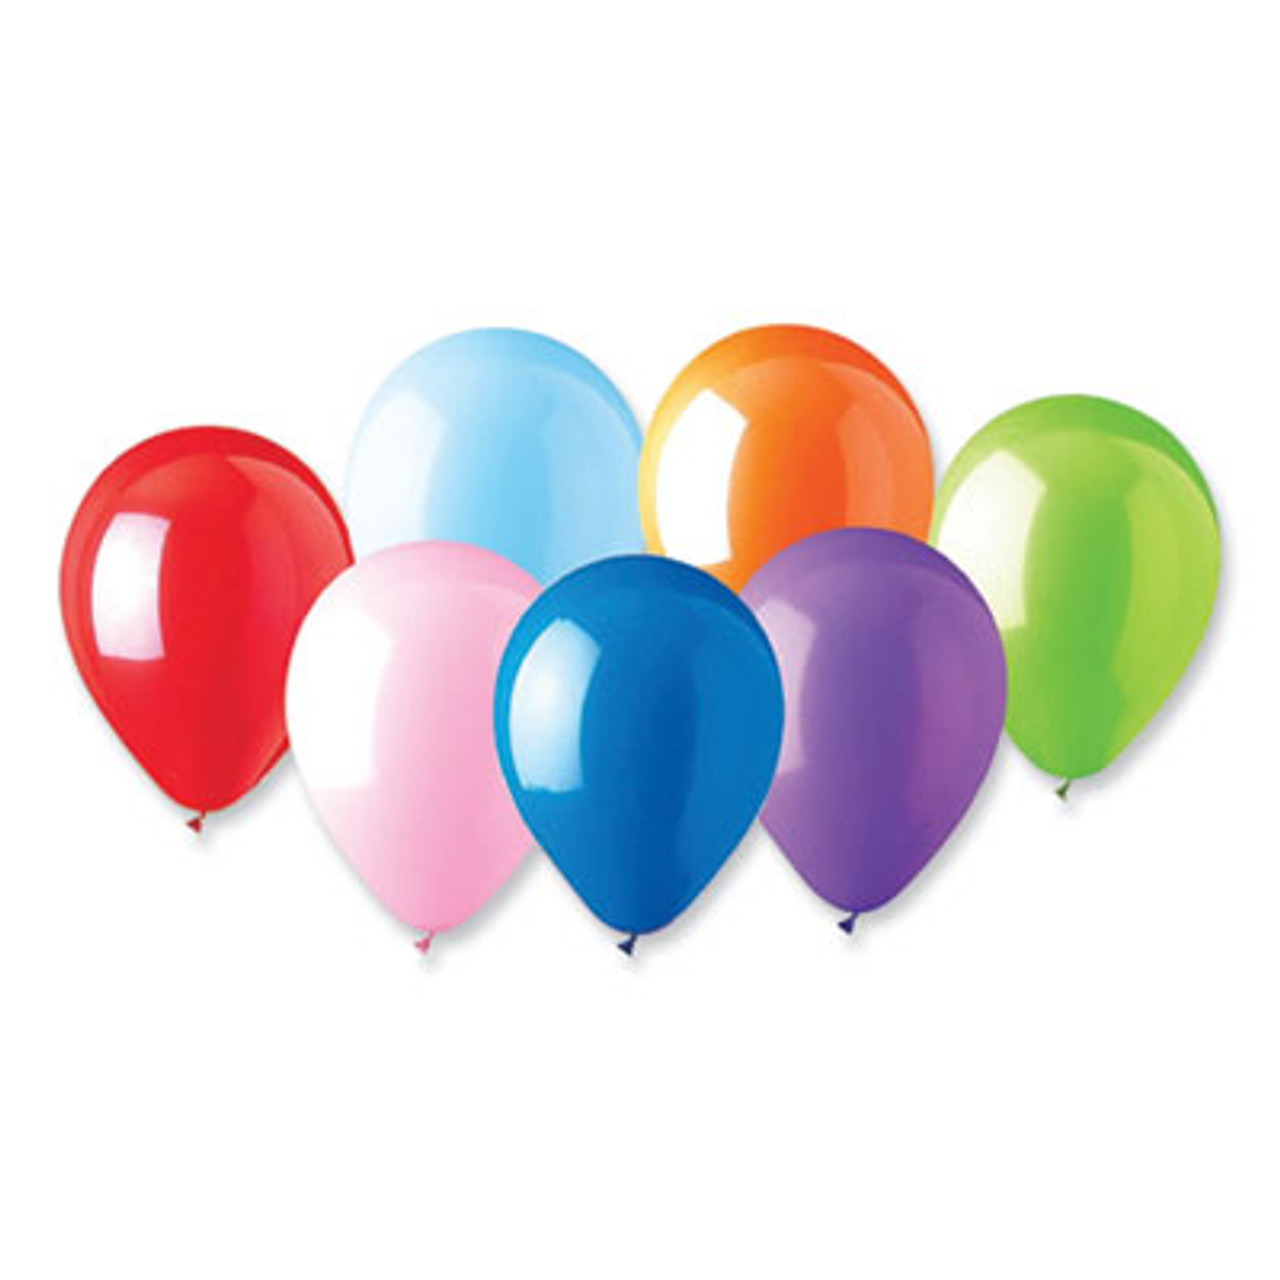 Tablemate 916100 Balloons, 12, Helium Quality Latex